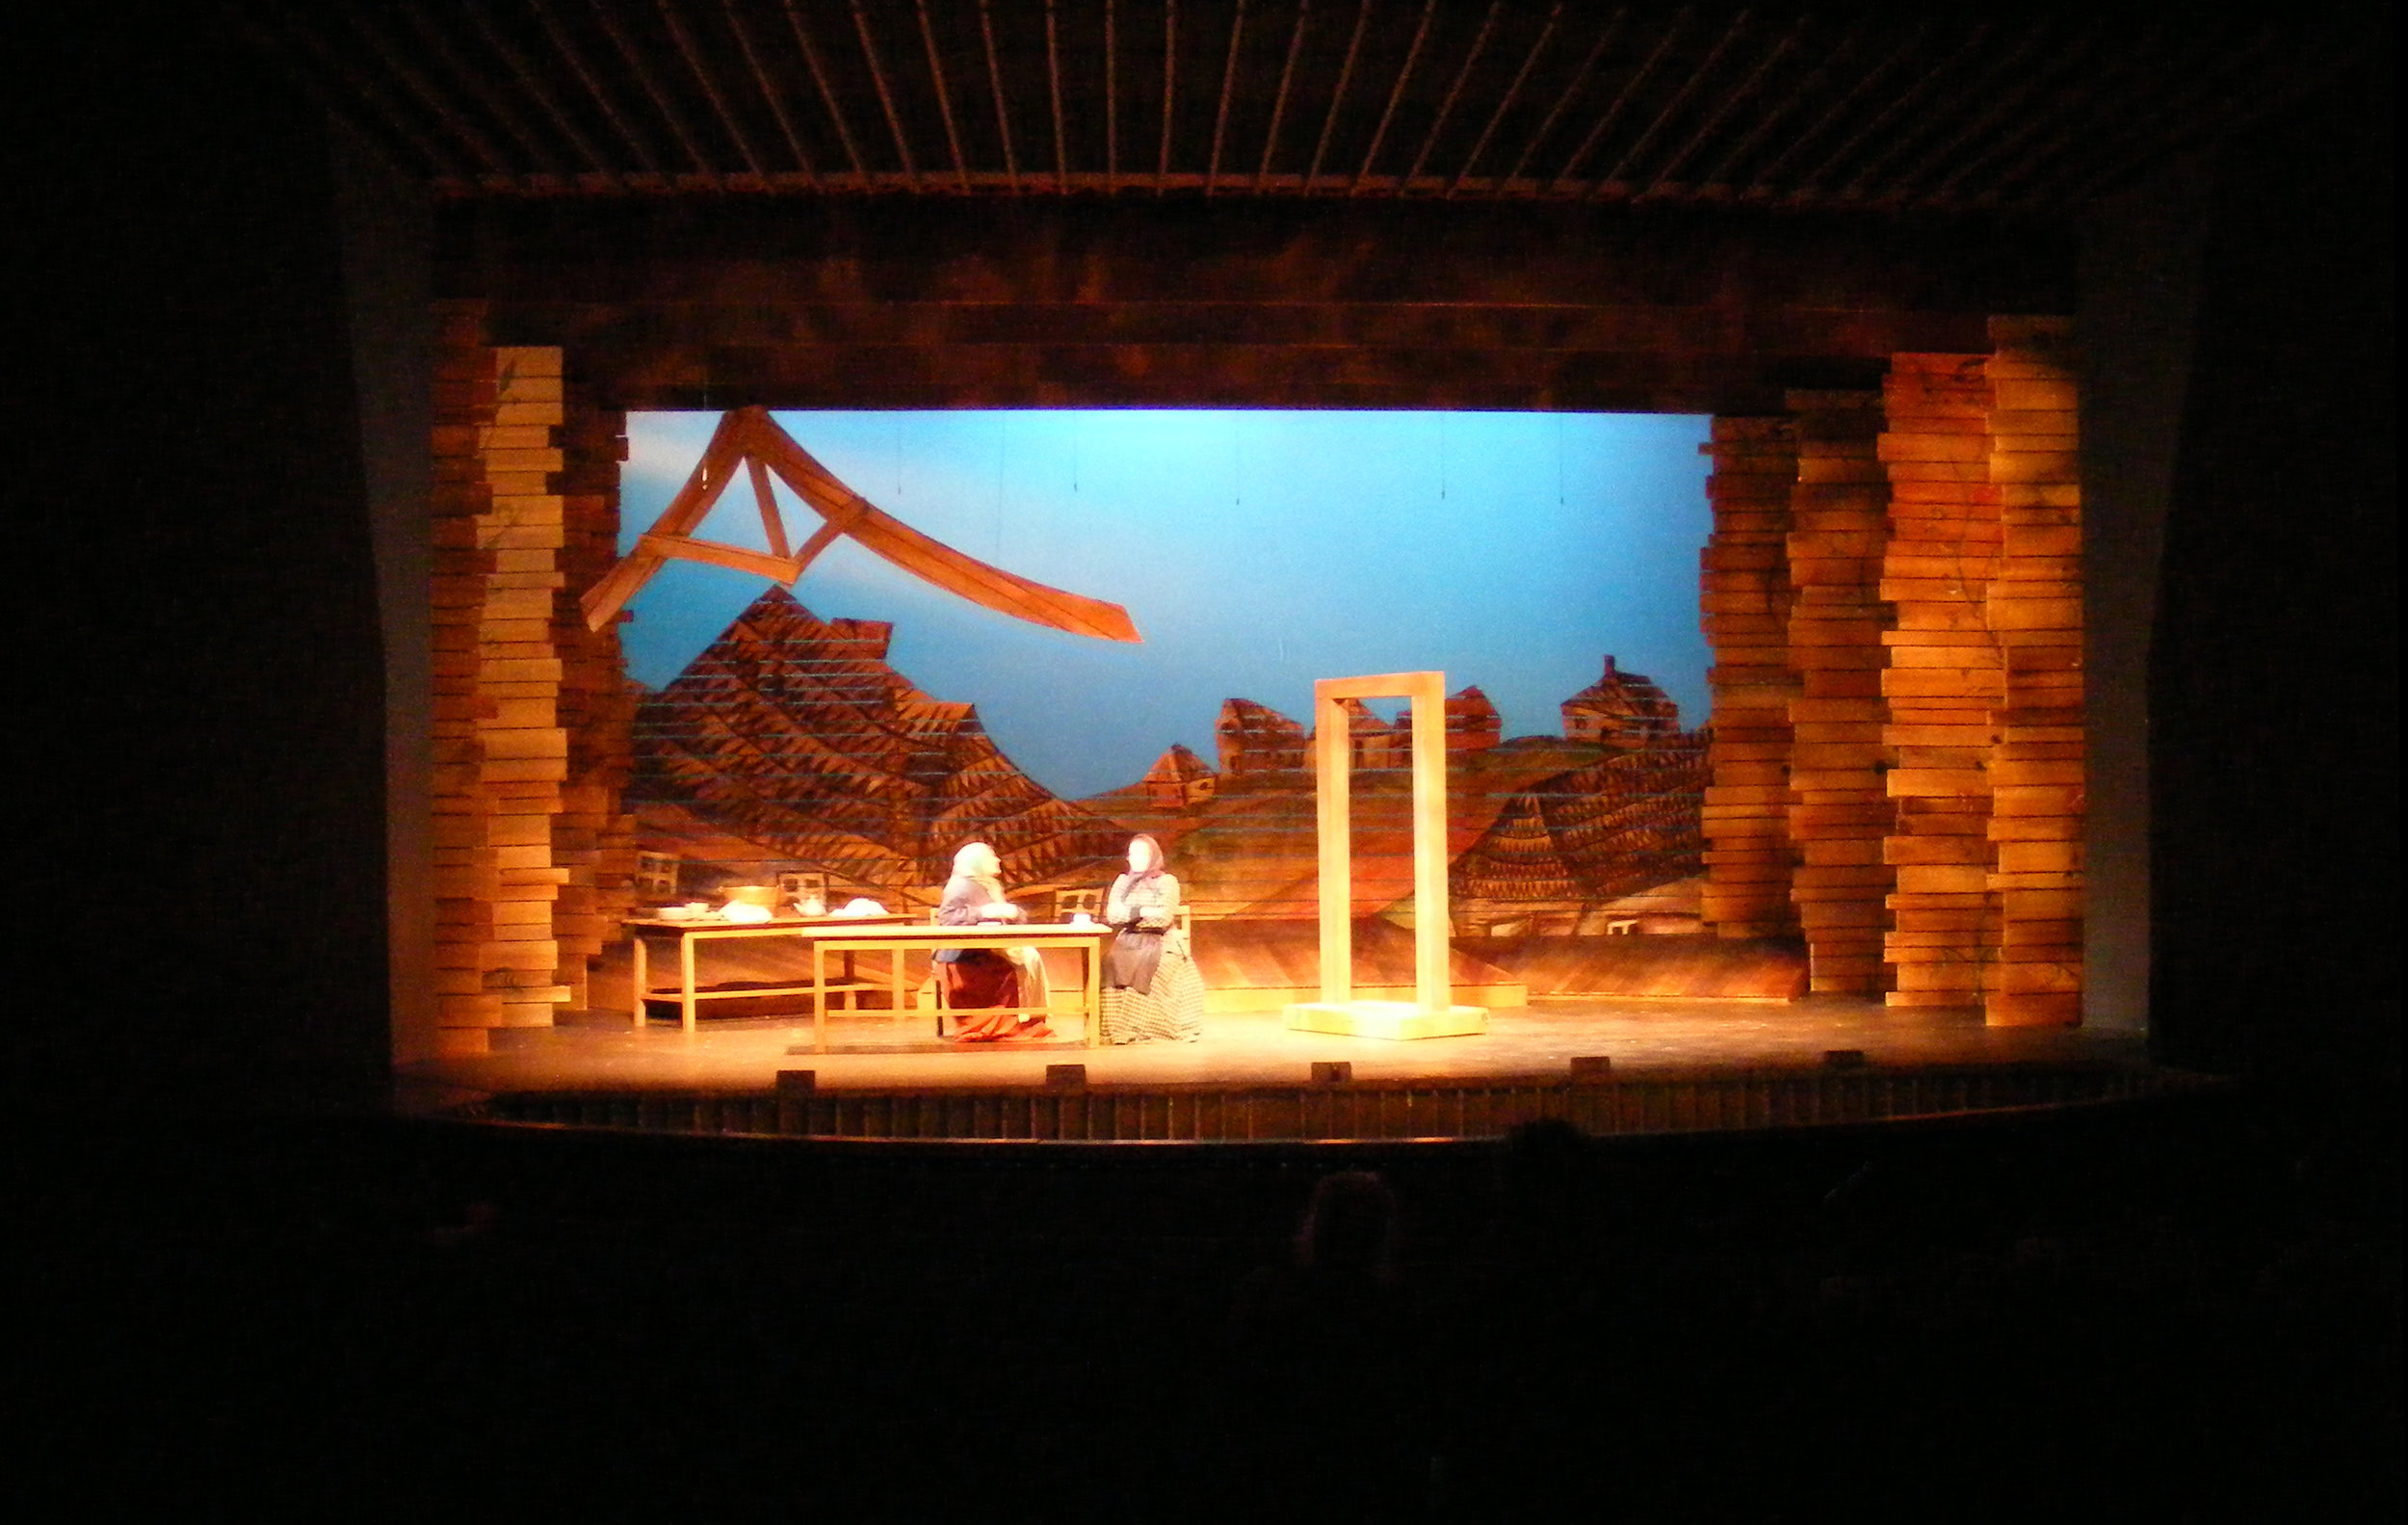   Fiddler on the Roof  - 2009 